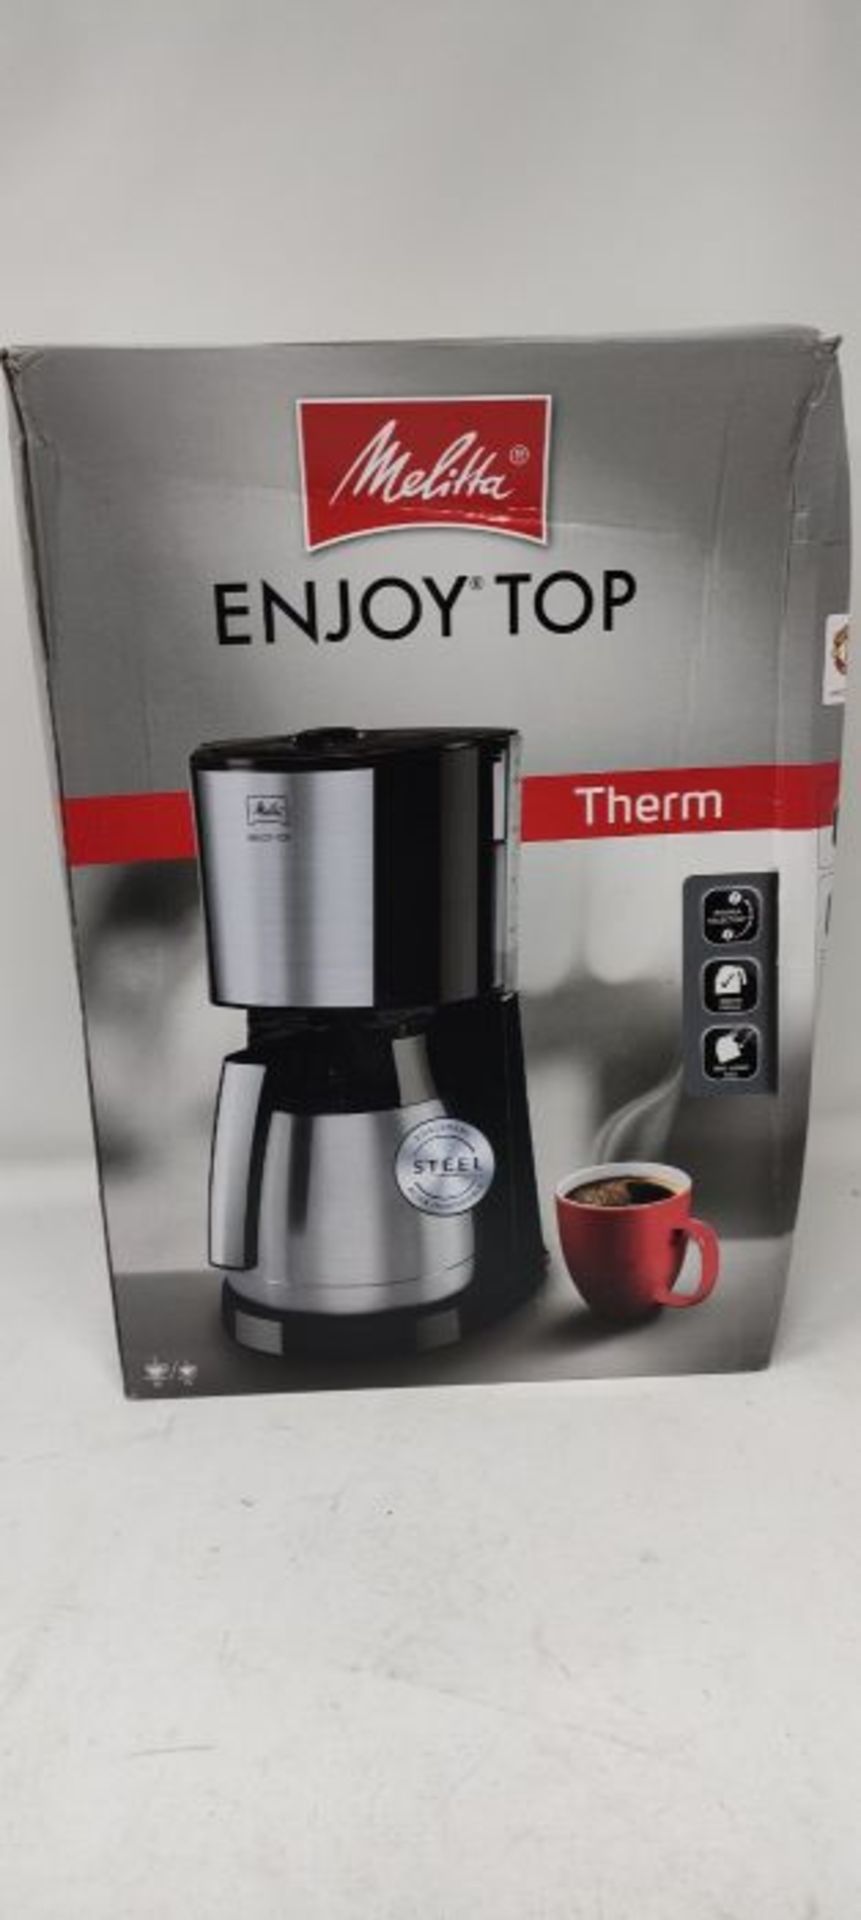 RRP £51.00 Melitta Enjoy Top Therm, 1017-08, Coffee Machine with Insulated Stainless Steel Jug, A - Image 2 of 2